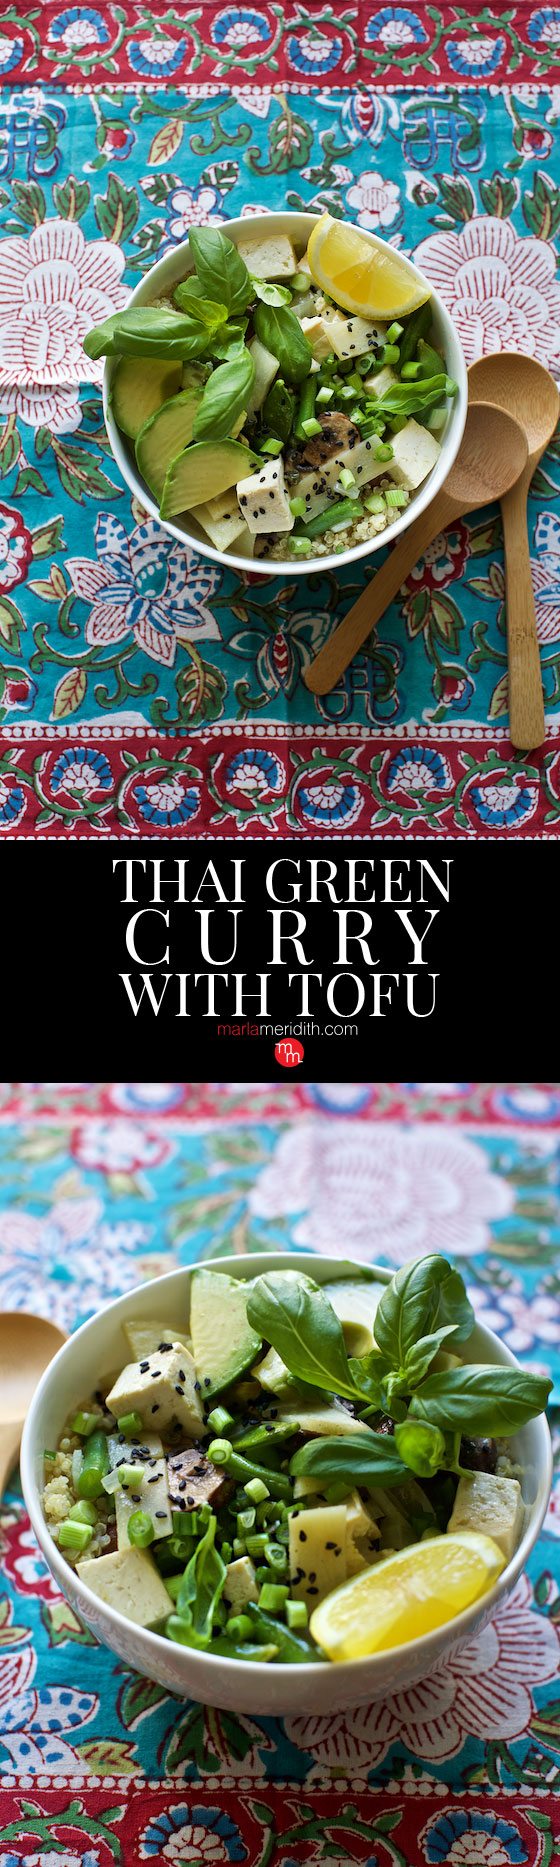 Thai Green Curry with Tofu recipe. As good as your local Thai restaurant & budget friendly! #meatlessmonday MarlaMeridith.com ( @marlameridith )